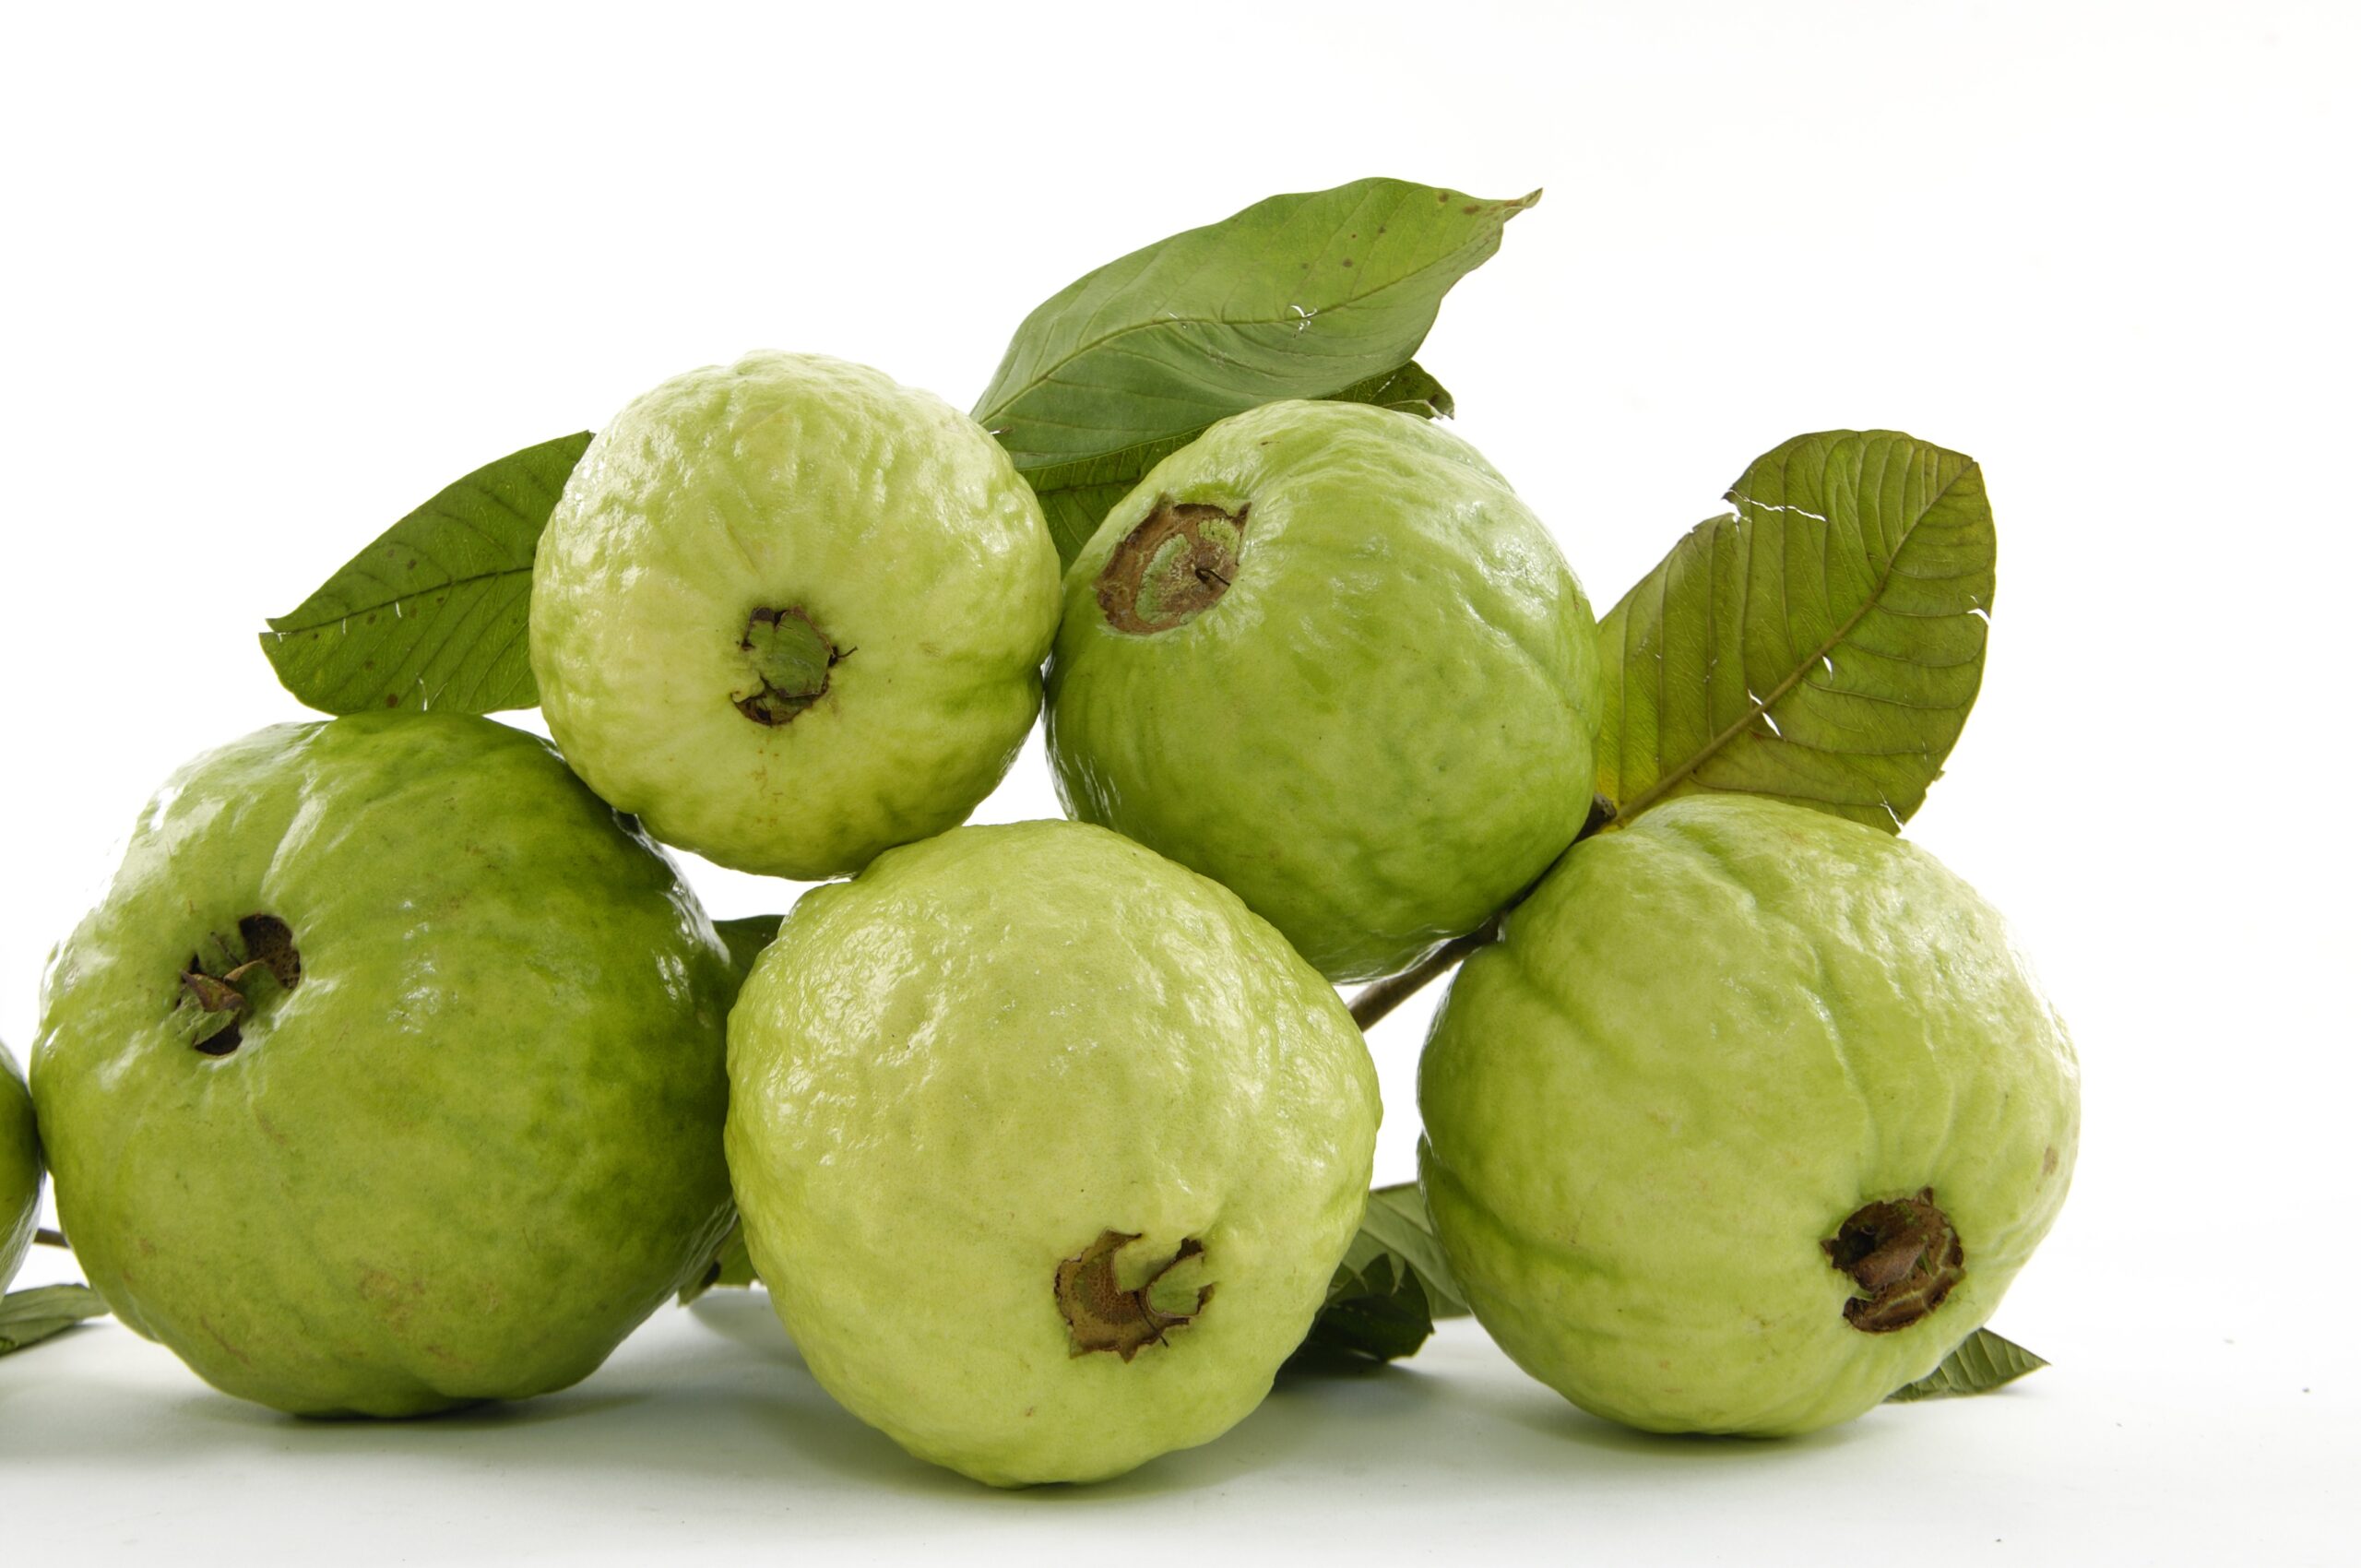 Guava Benefits for health: Why eat Guava, Nutrition and Side Effects